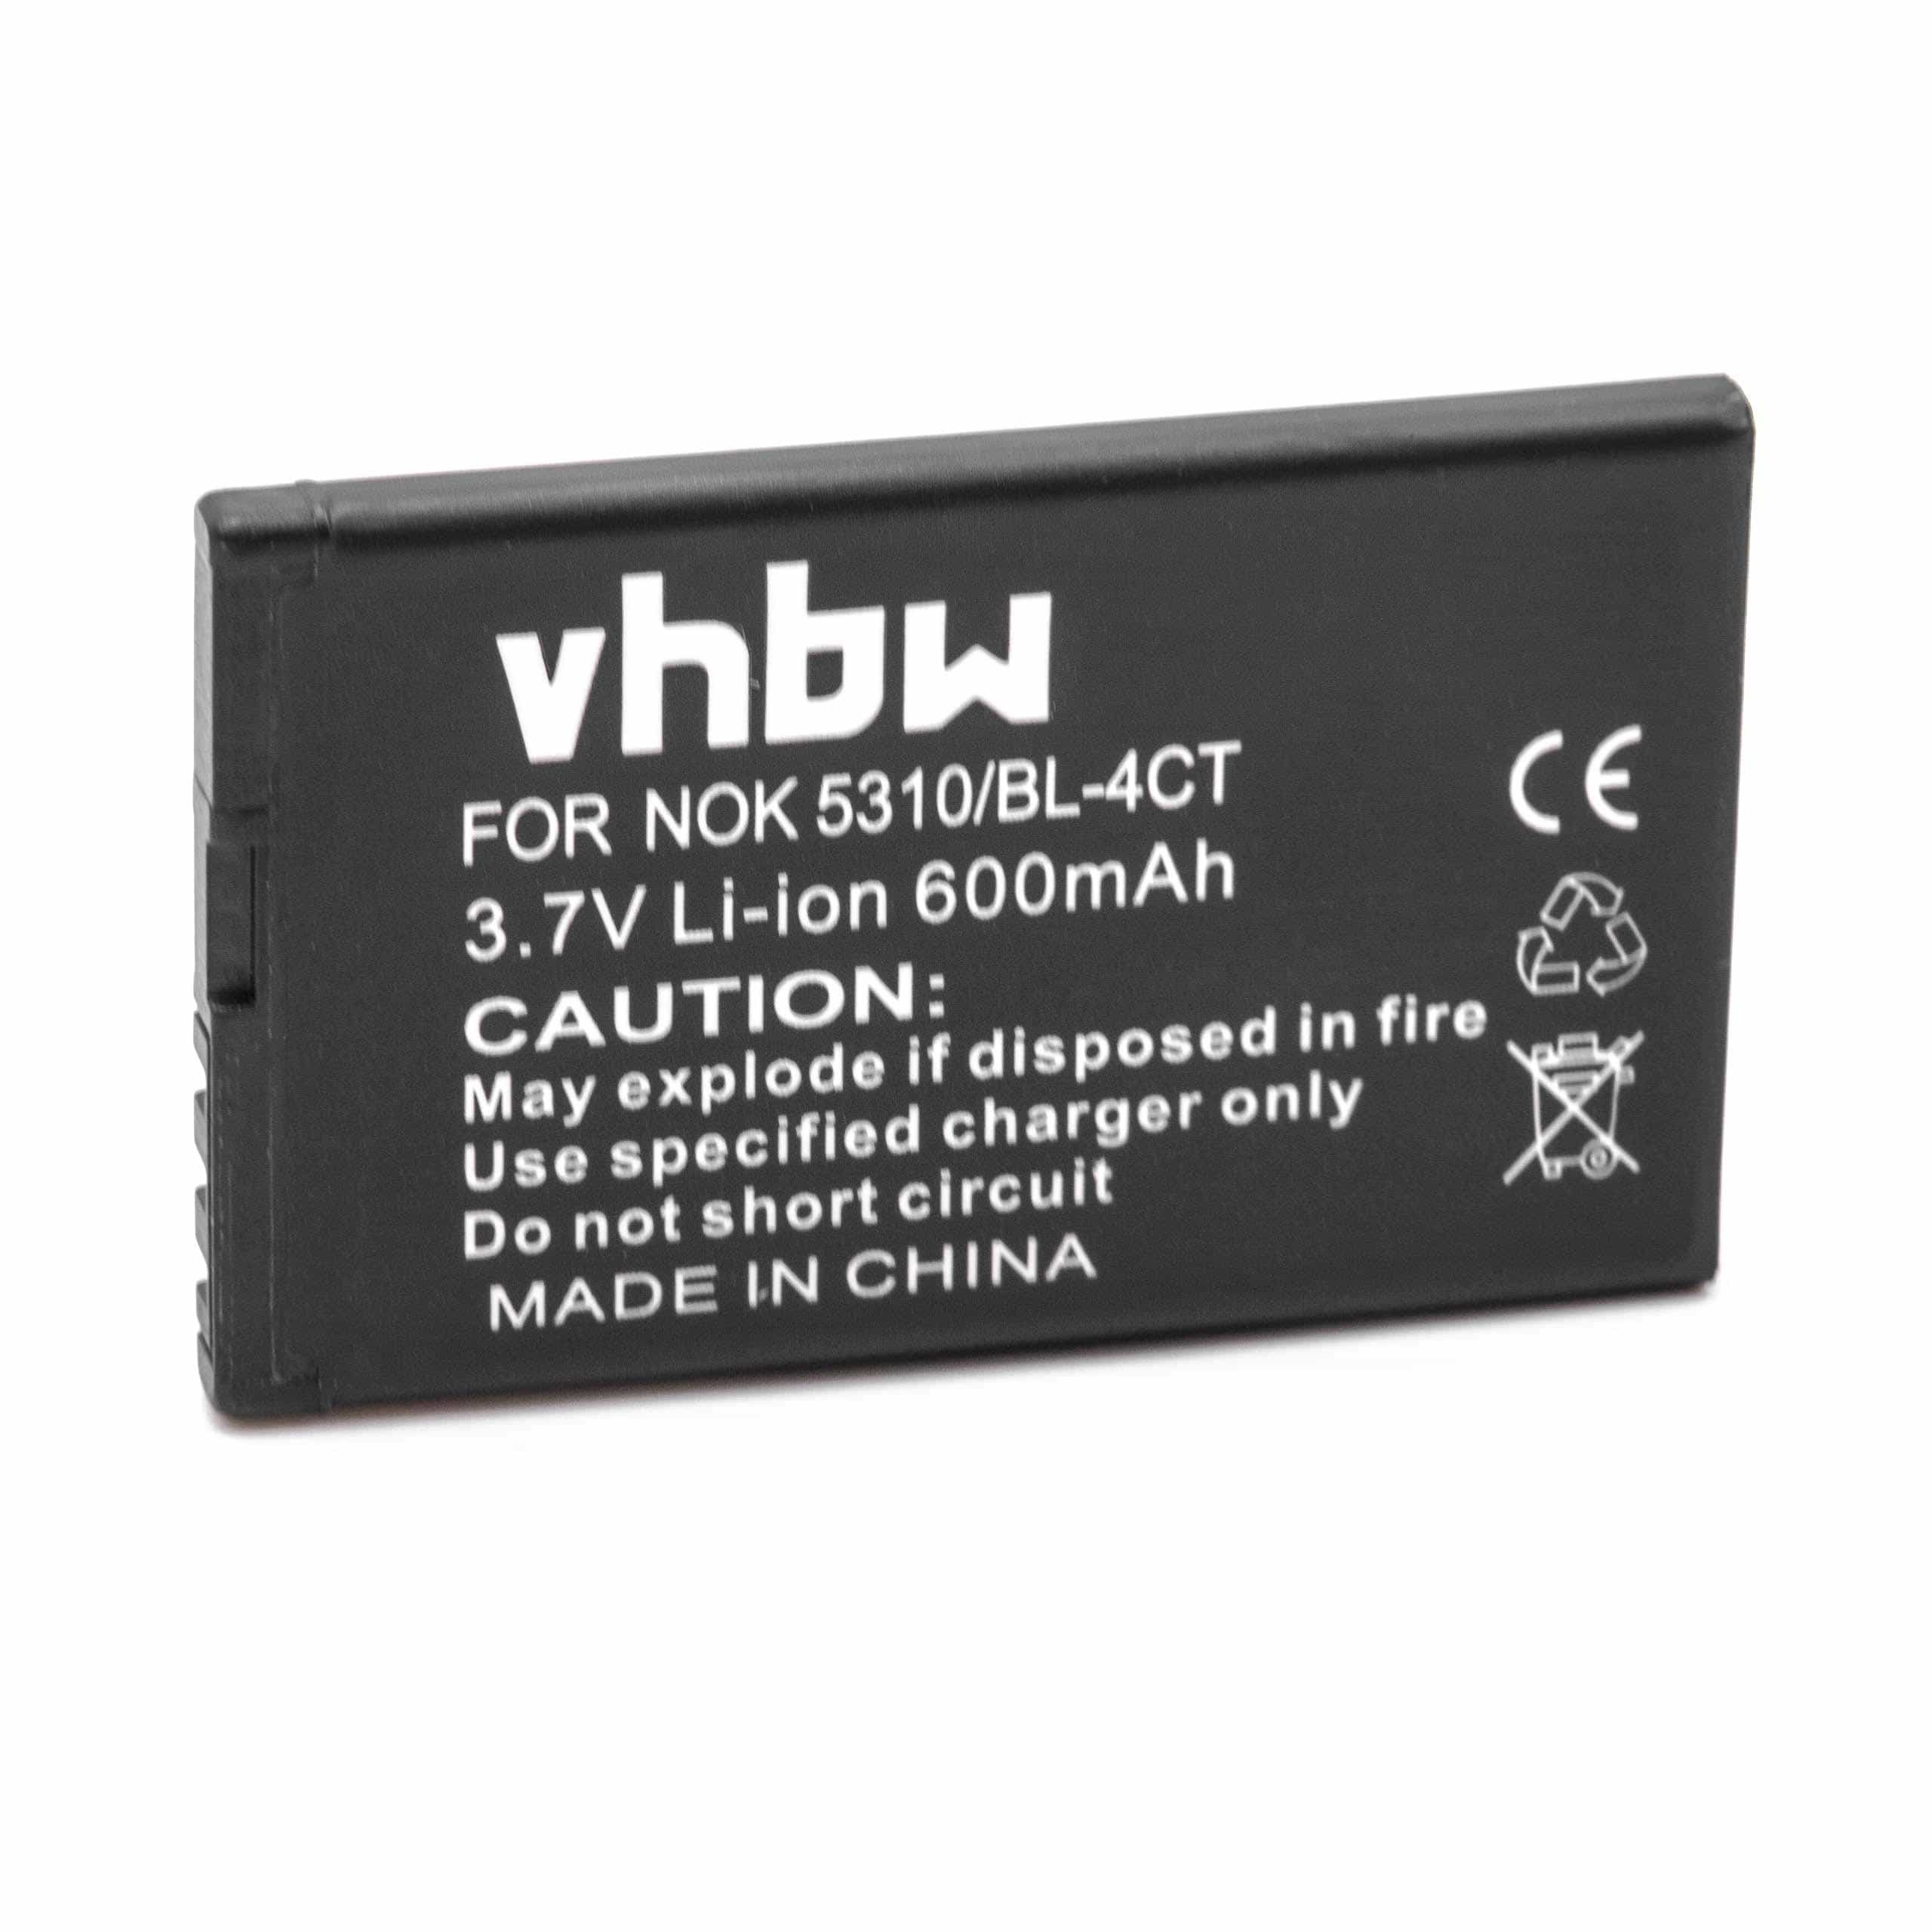 Mobile Phone Battery Replacement for Nokia BL-4CT - 600mAh 3.7V Li-ion